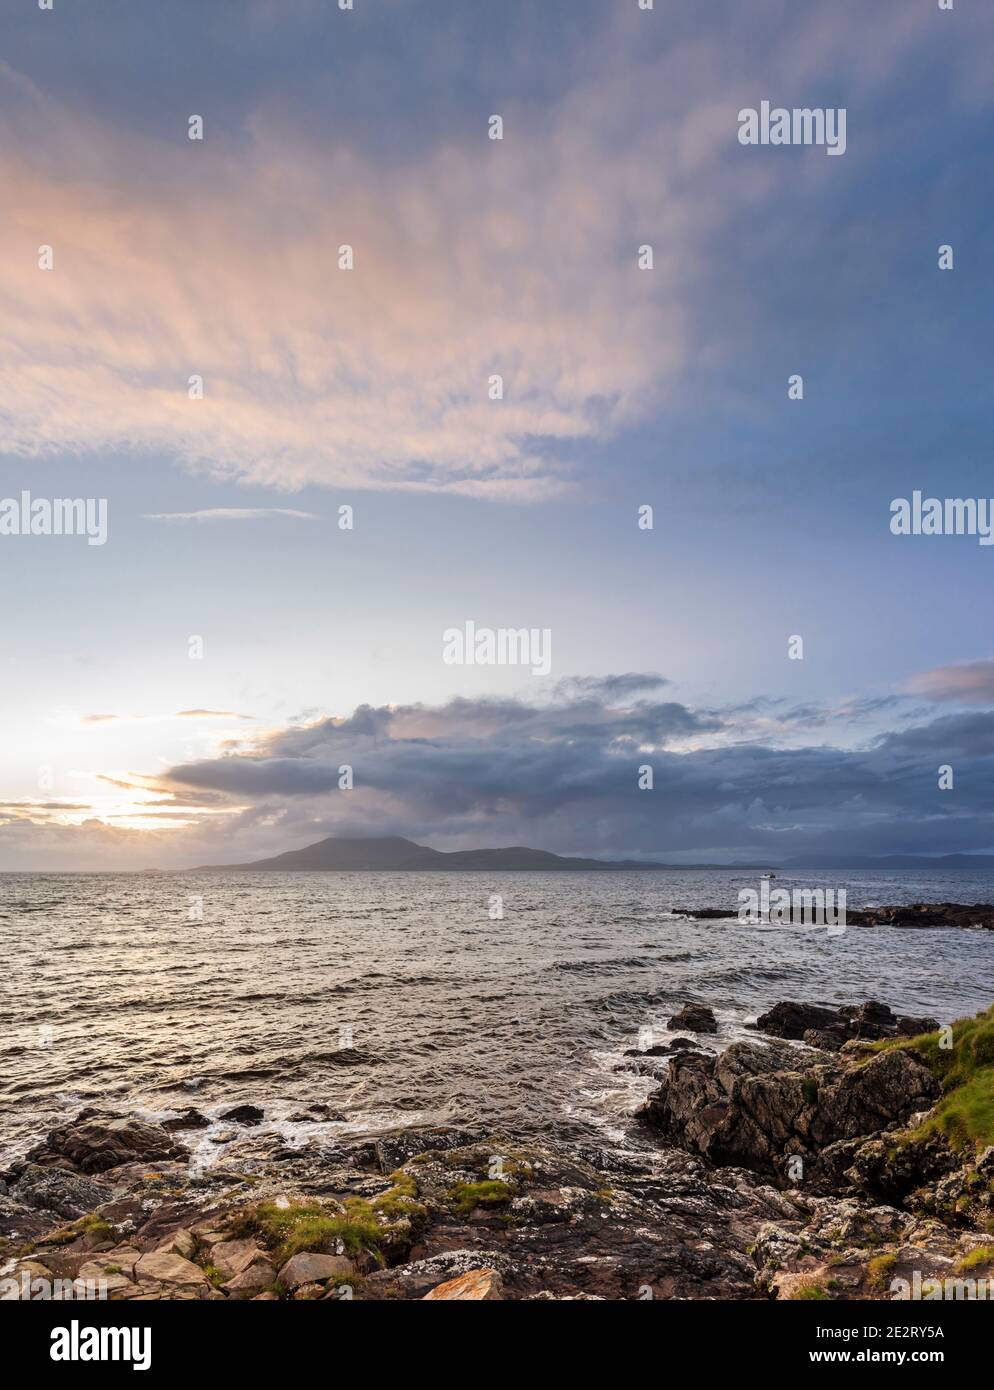 View across a turbulent sea at sunset towards Clare Island from Roonagh Pier, west of Louisburg, County Mayo, Ireland Stock Photo